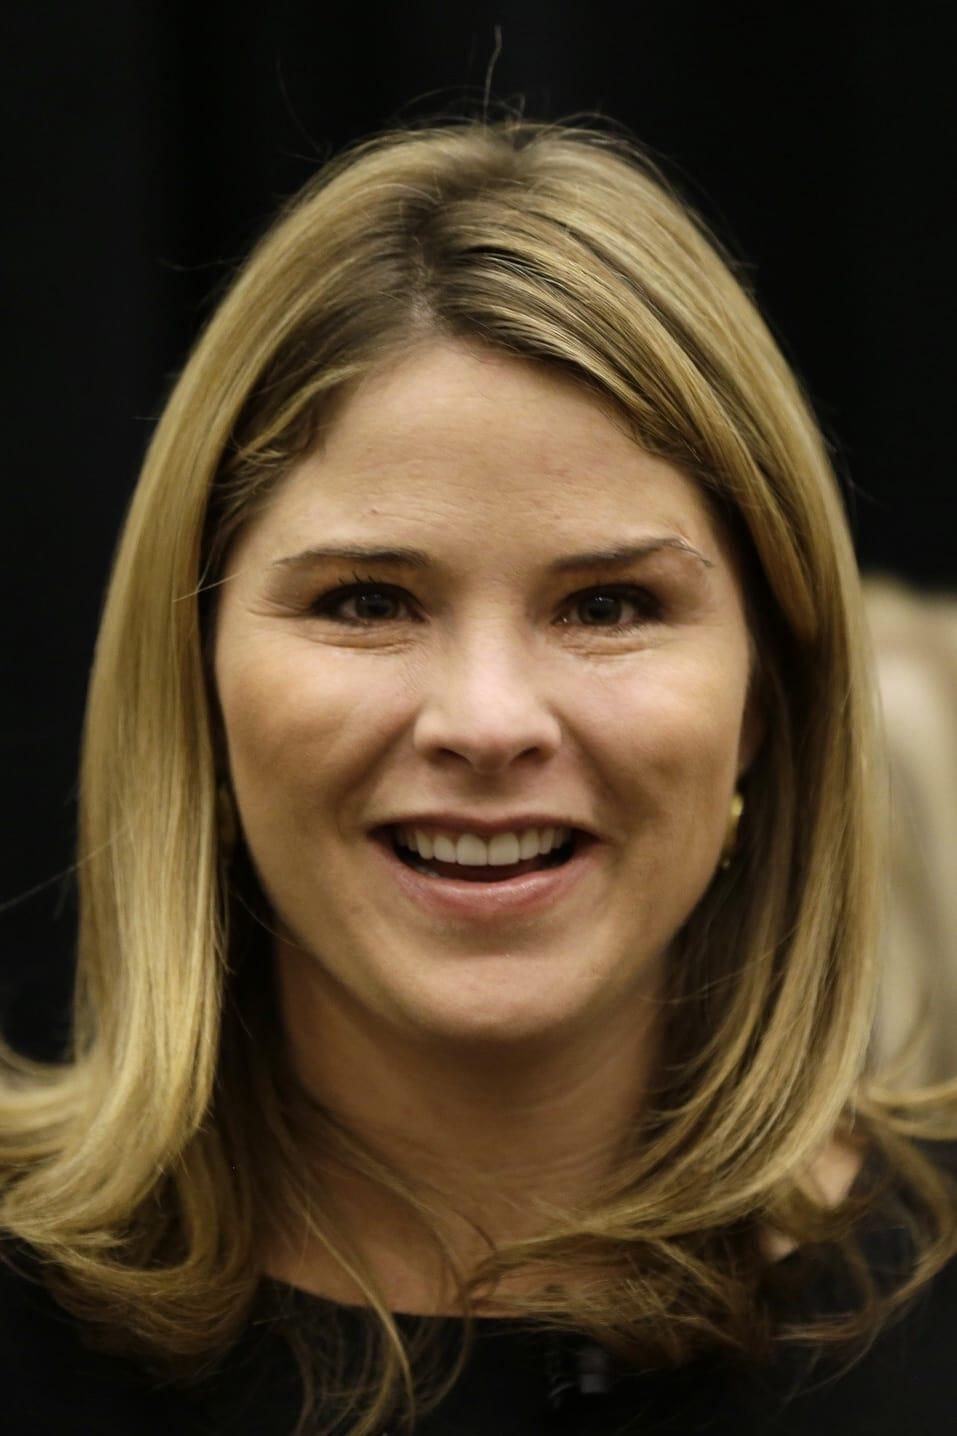 Jenna Bush Hager | Self (archive footage) (uncredited)